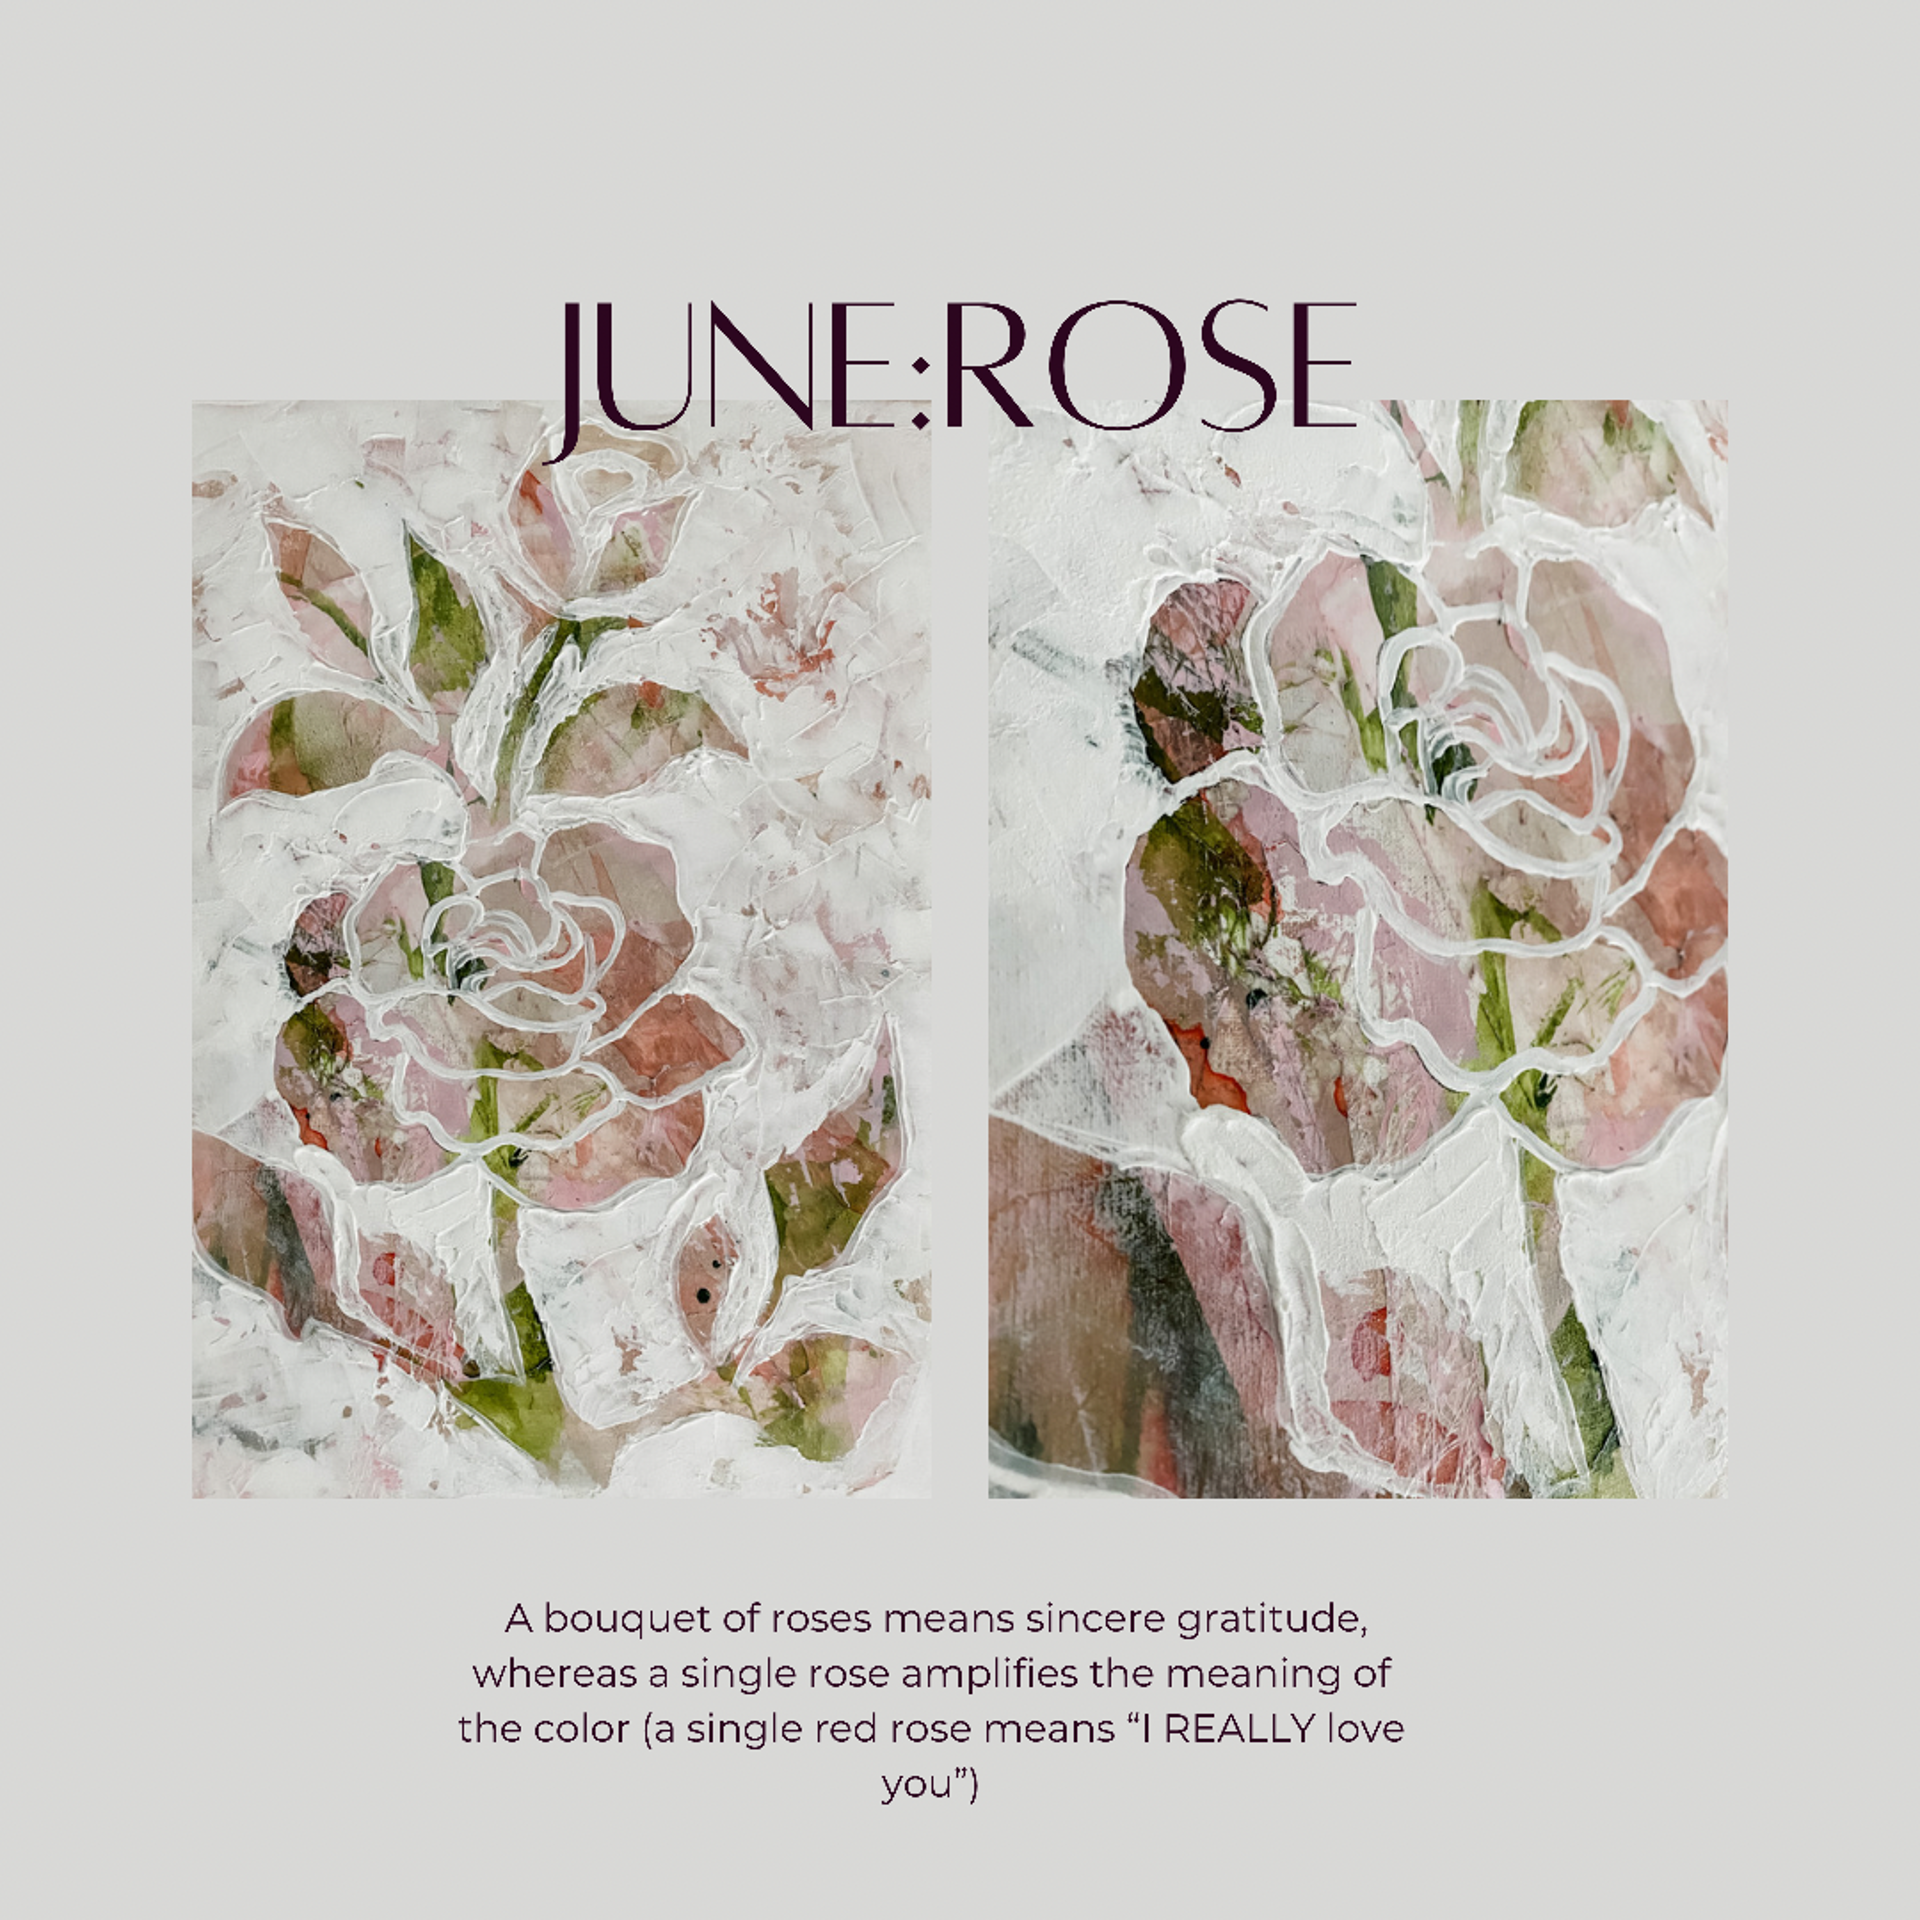 June Roses by Corinne Mitchell